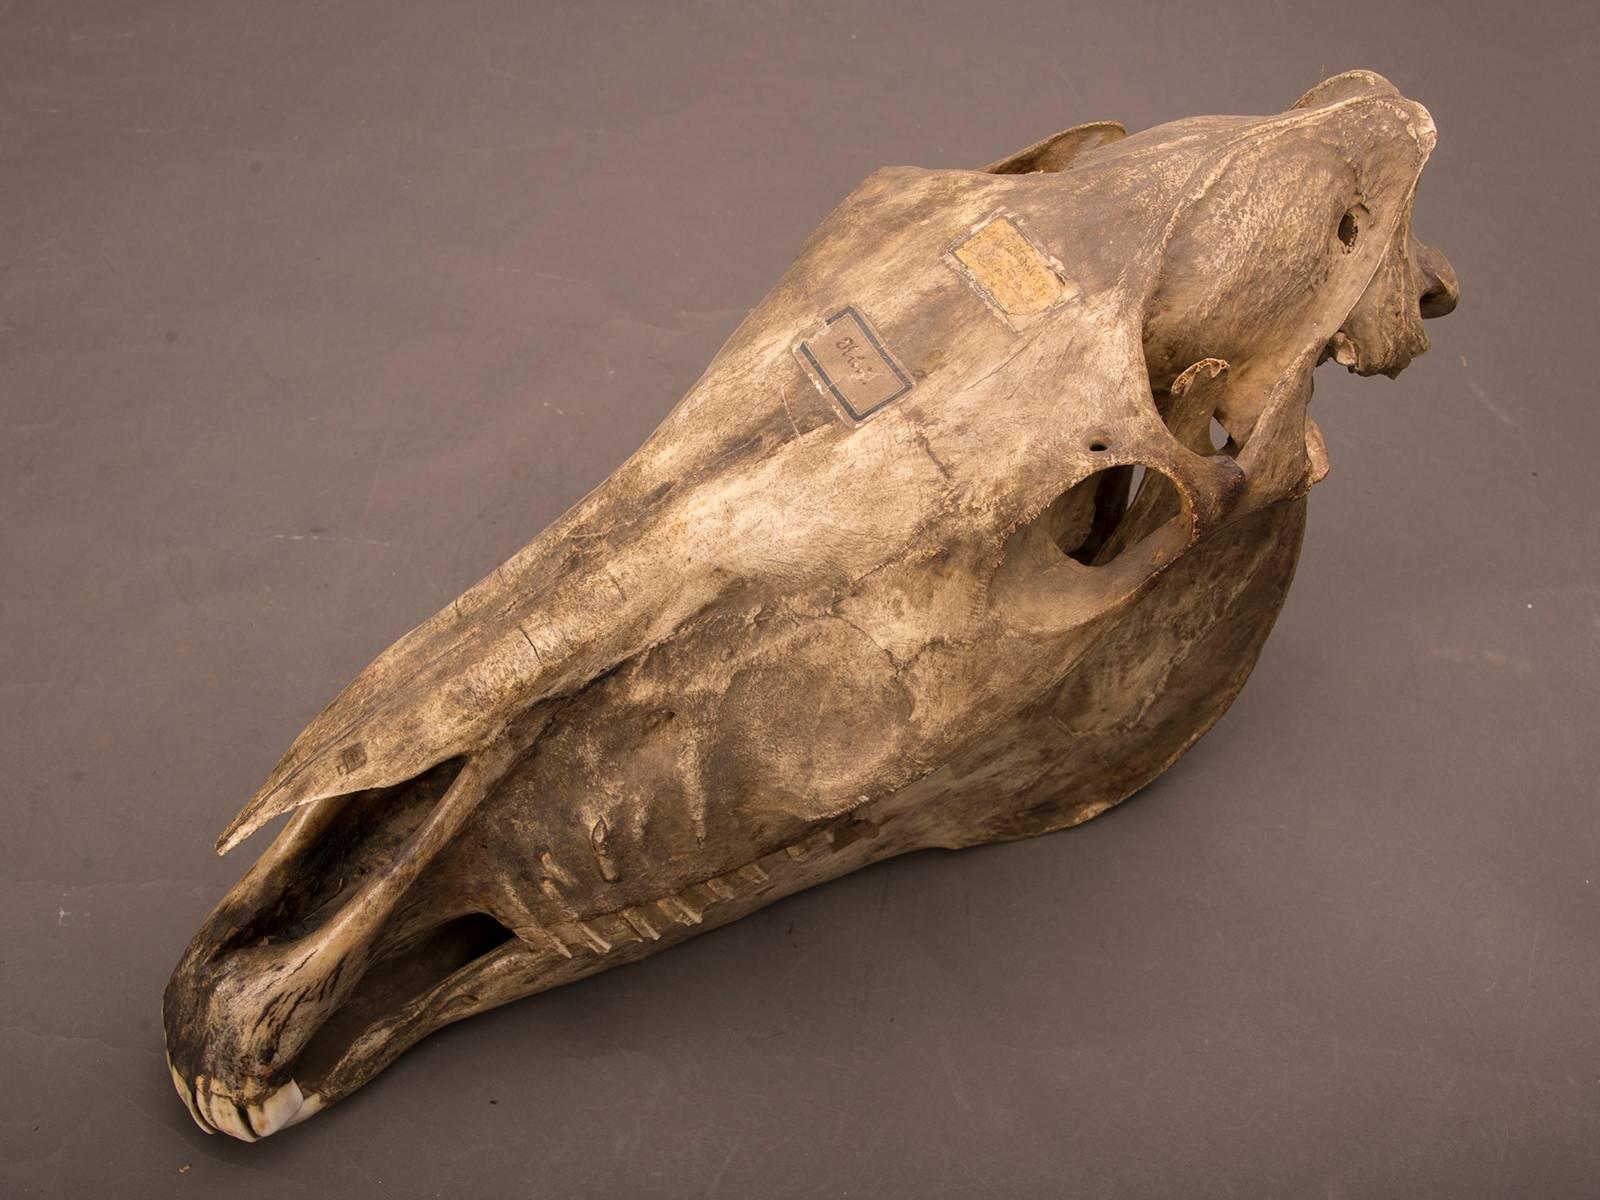 An entire and fully intact horse skull from a 19th century Belgian naturalist's collection, circa 1885. The interest in classifying and collecting specimens from the natural world reached its apogee in the 19th century. This desire to display one's